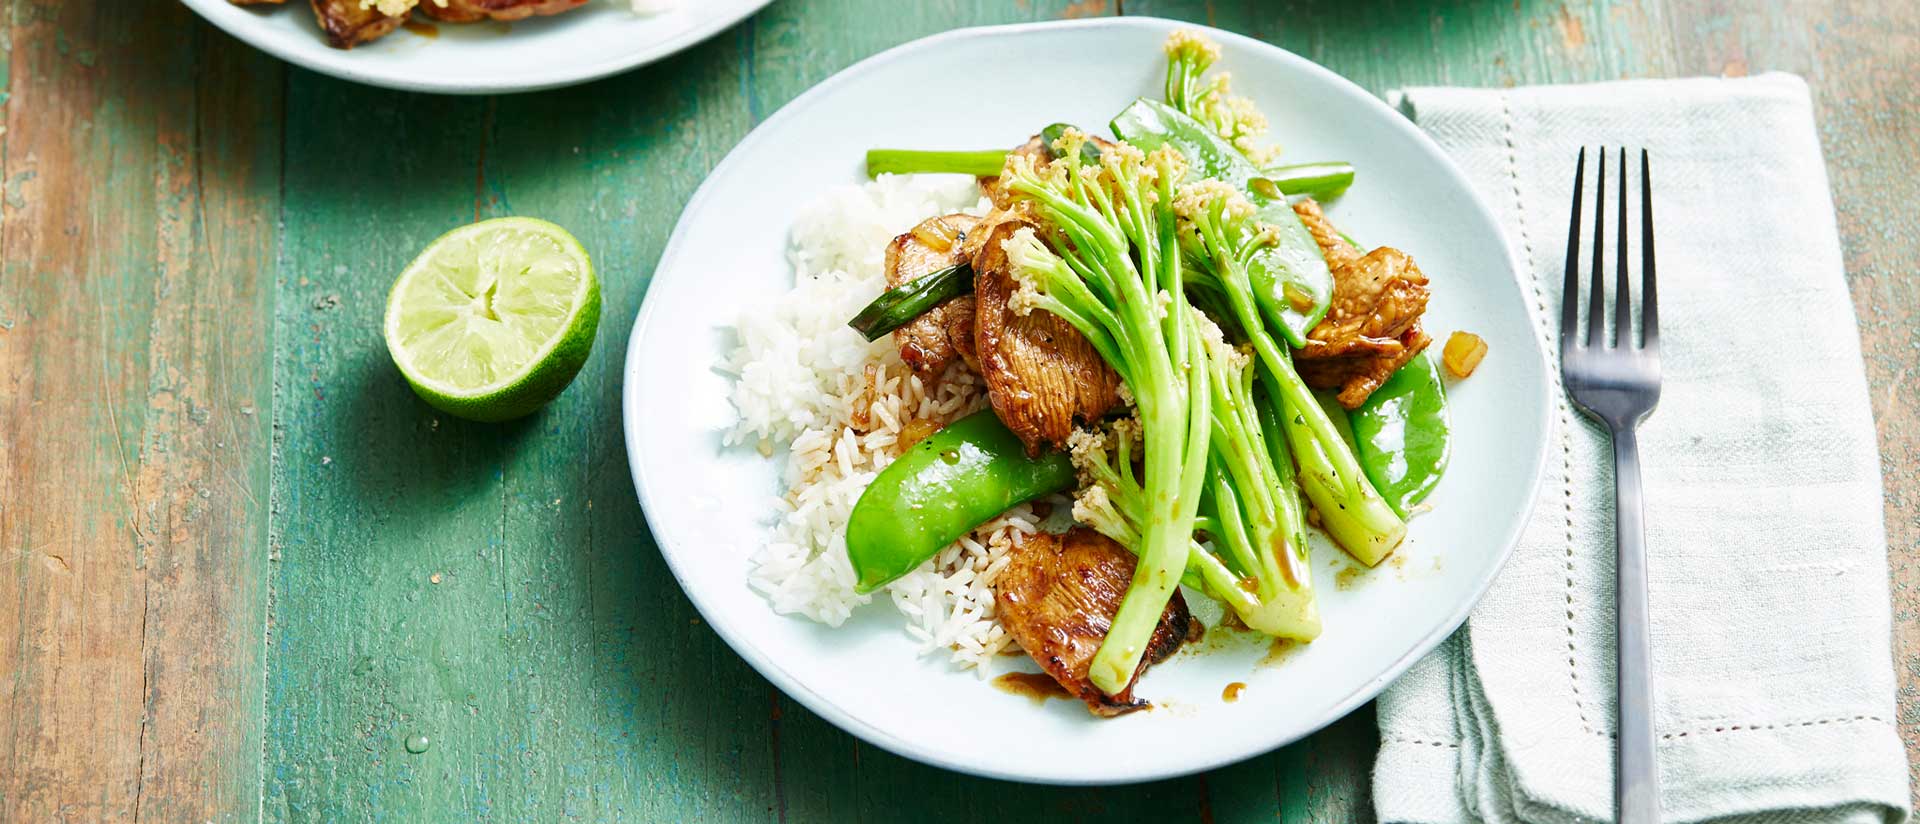 Fioretto Soy Chicken Lime Ginger Stir Fry Recipe